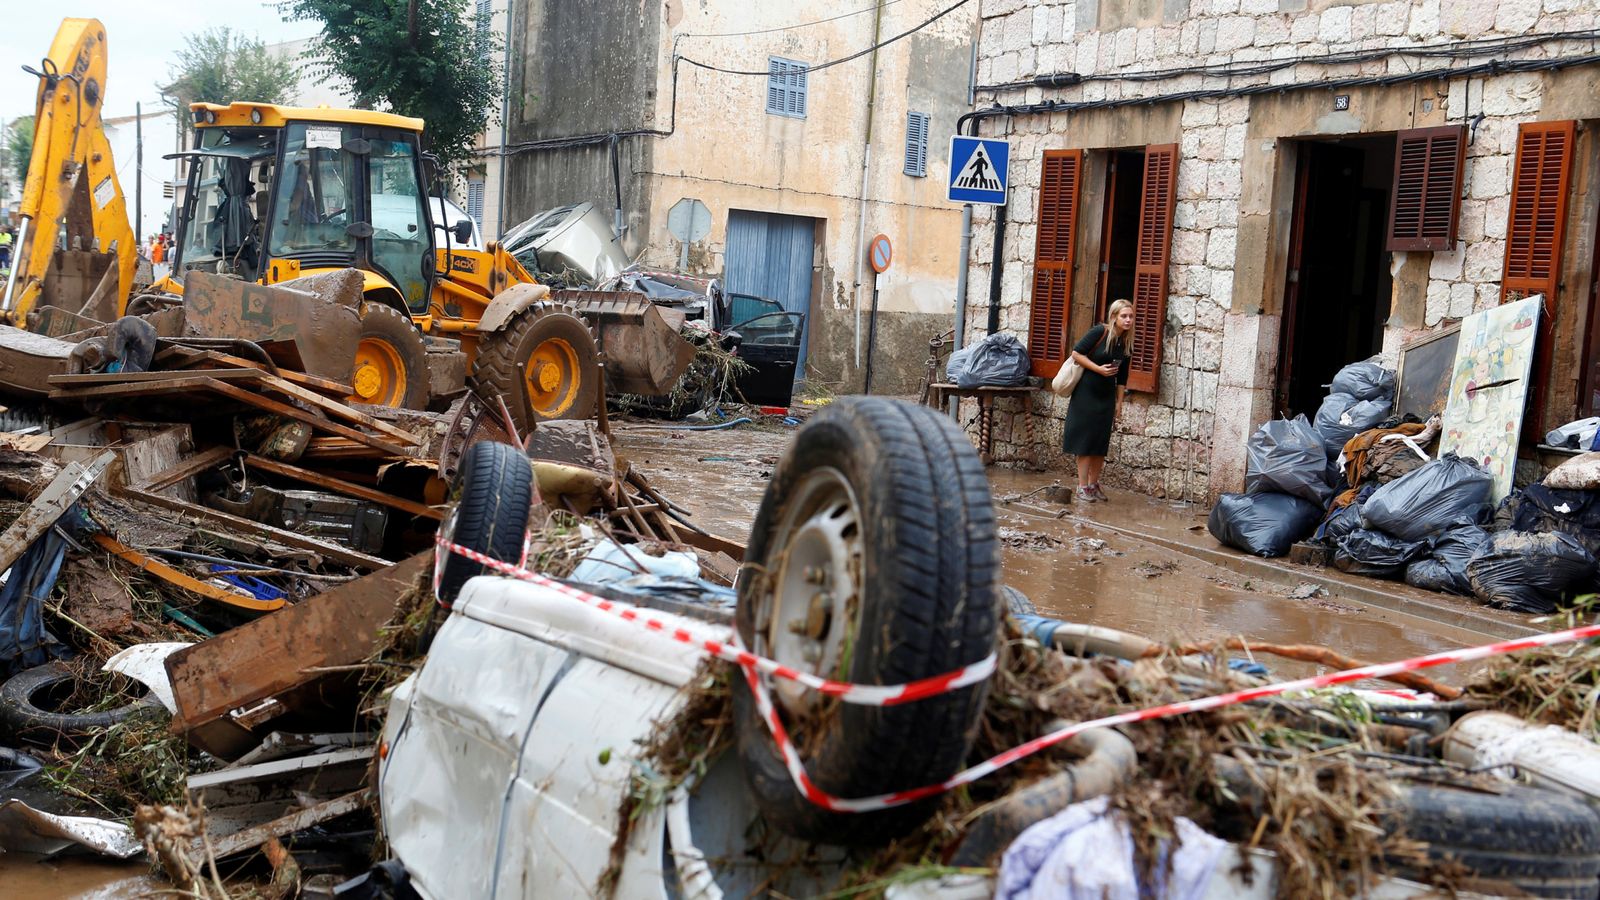 British couple killed in Majorca flash floods named as Anthony and